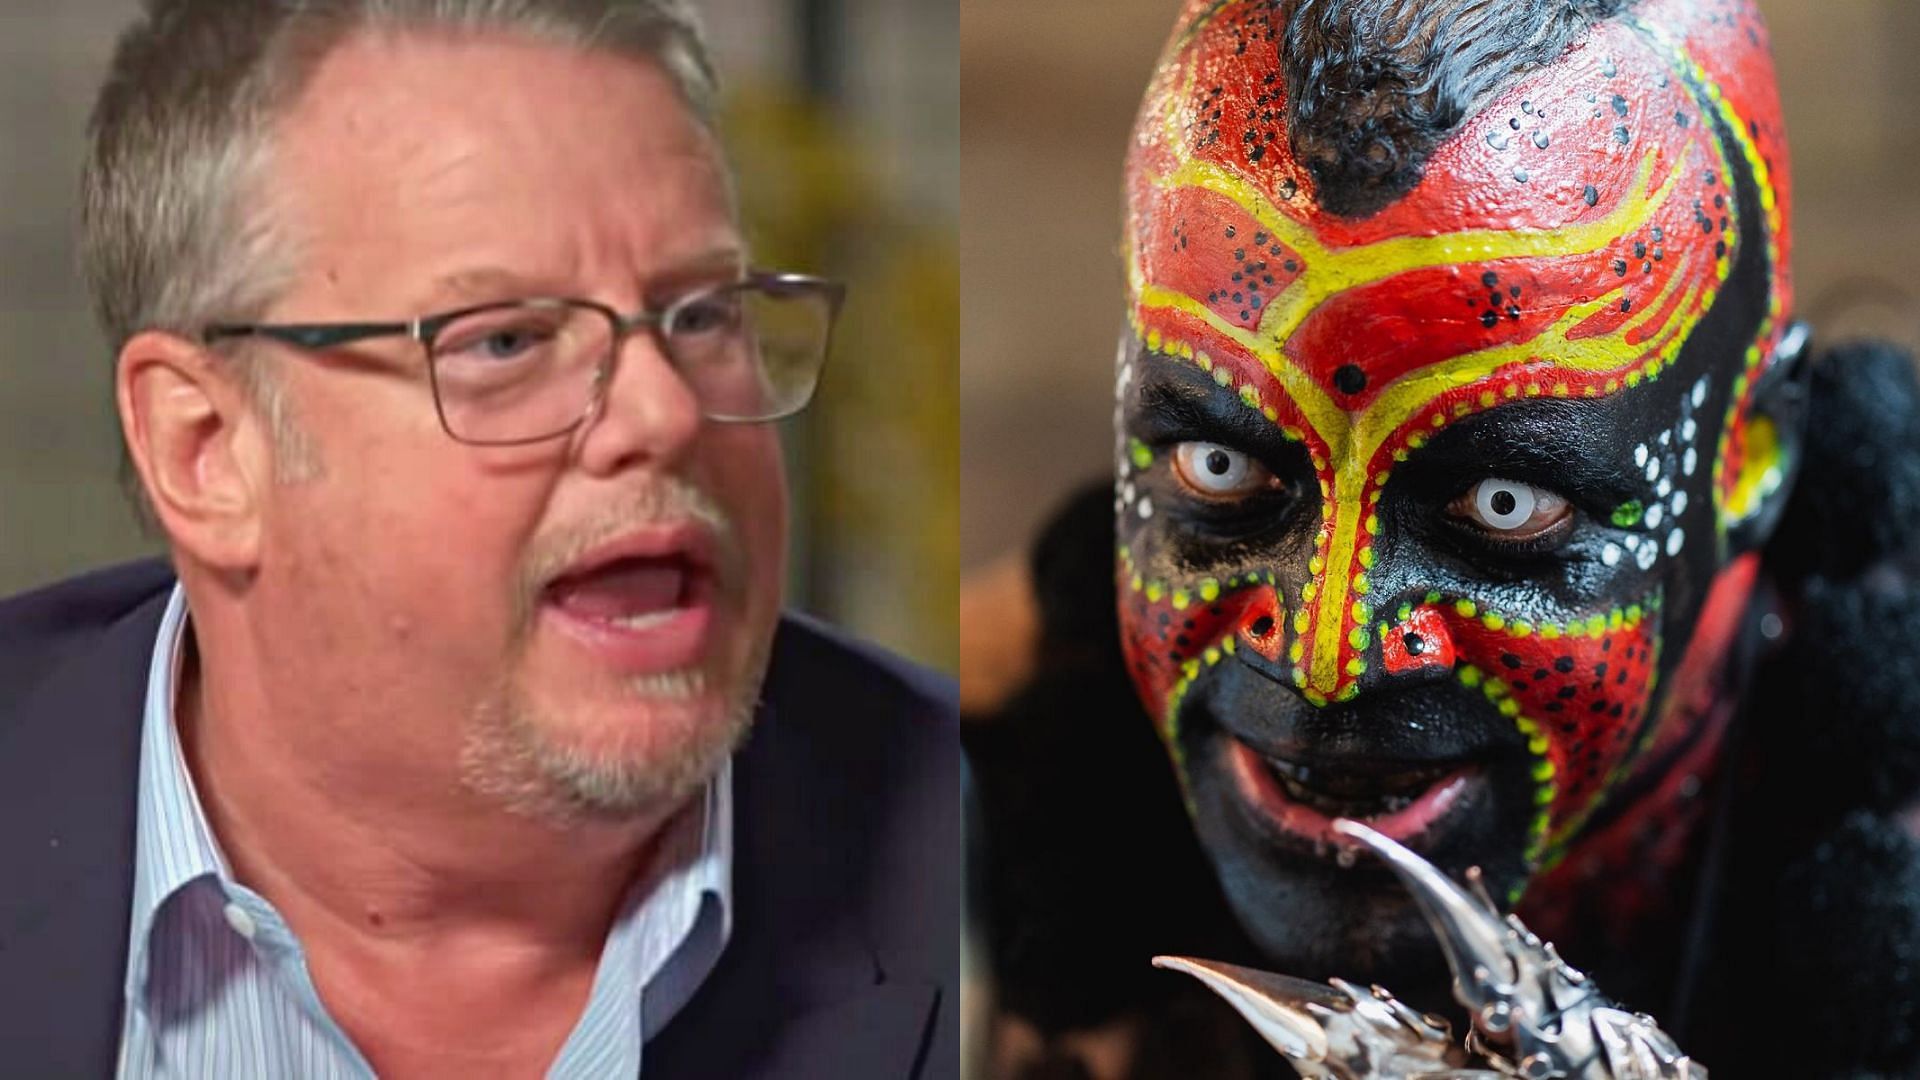 Bruce Prichard opened up about The Boogeyman character on his podcast.